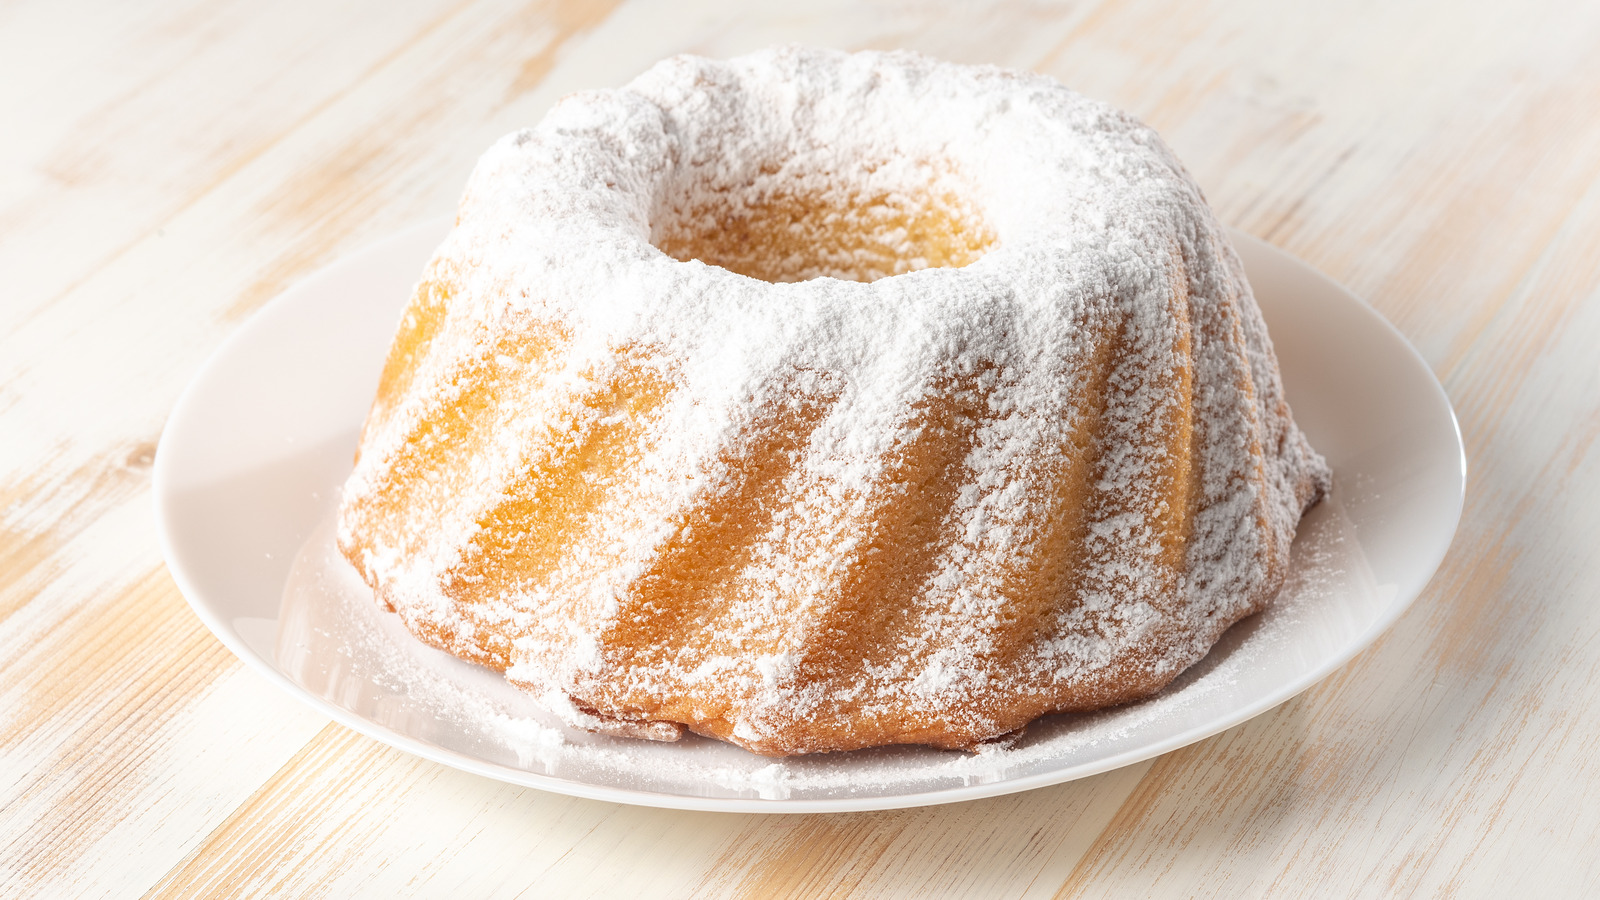 https://www.tastingtable.com/img/gallery/the-simple-method-to-prevent-bundt-cakes-from-sticking-to-the-pan/l-intro-1662988660.jpg